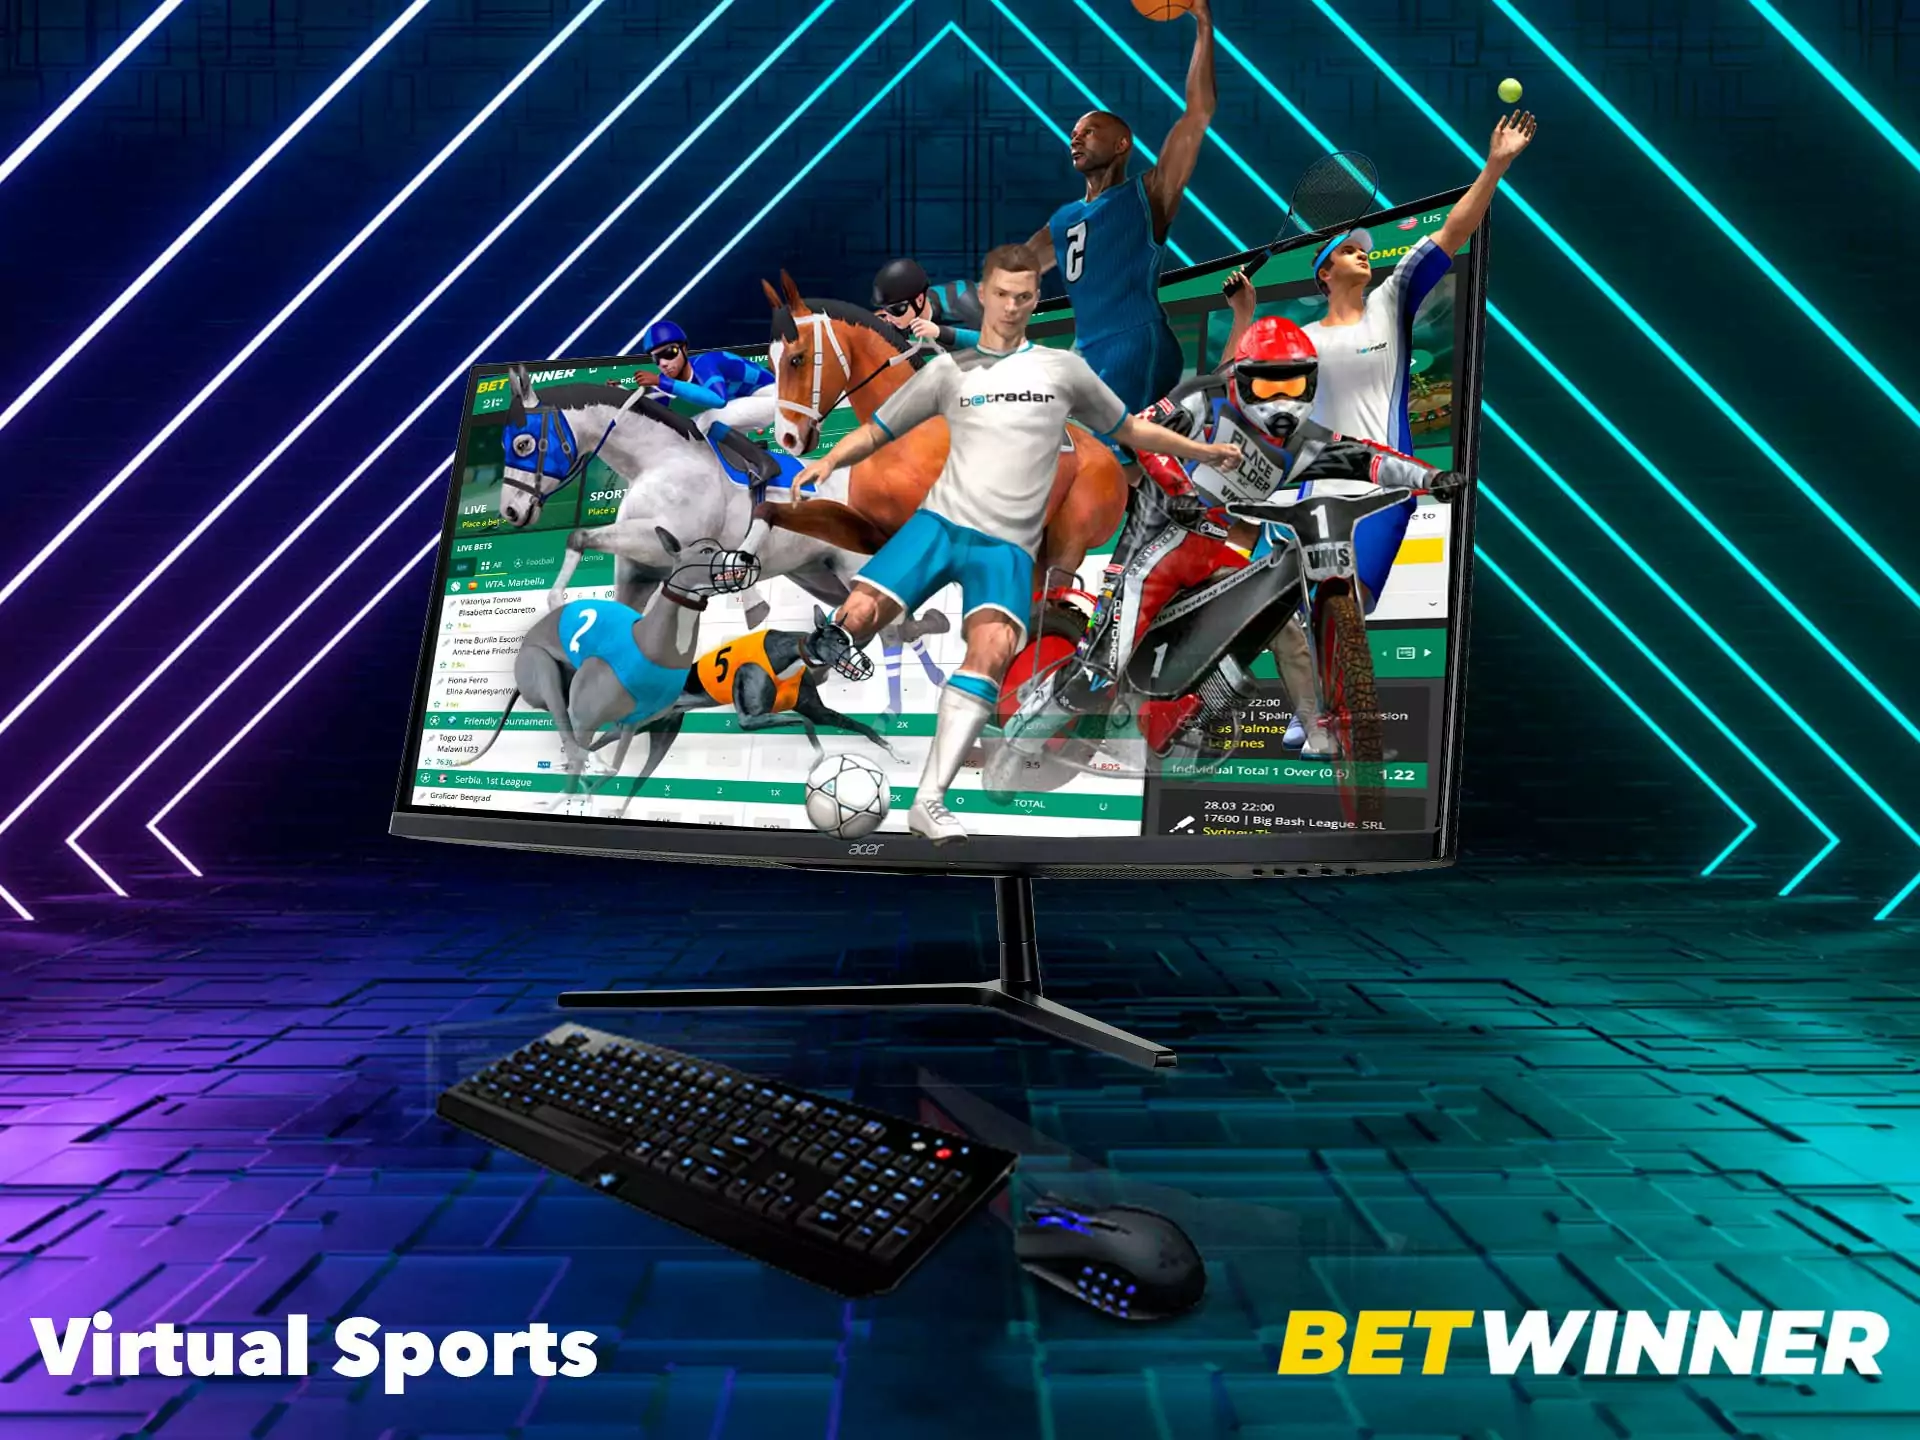 At Betwinner you can bet on sports that are played right on your smartphone screen.